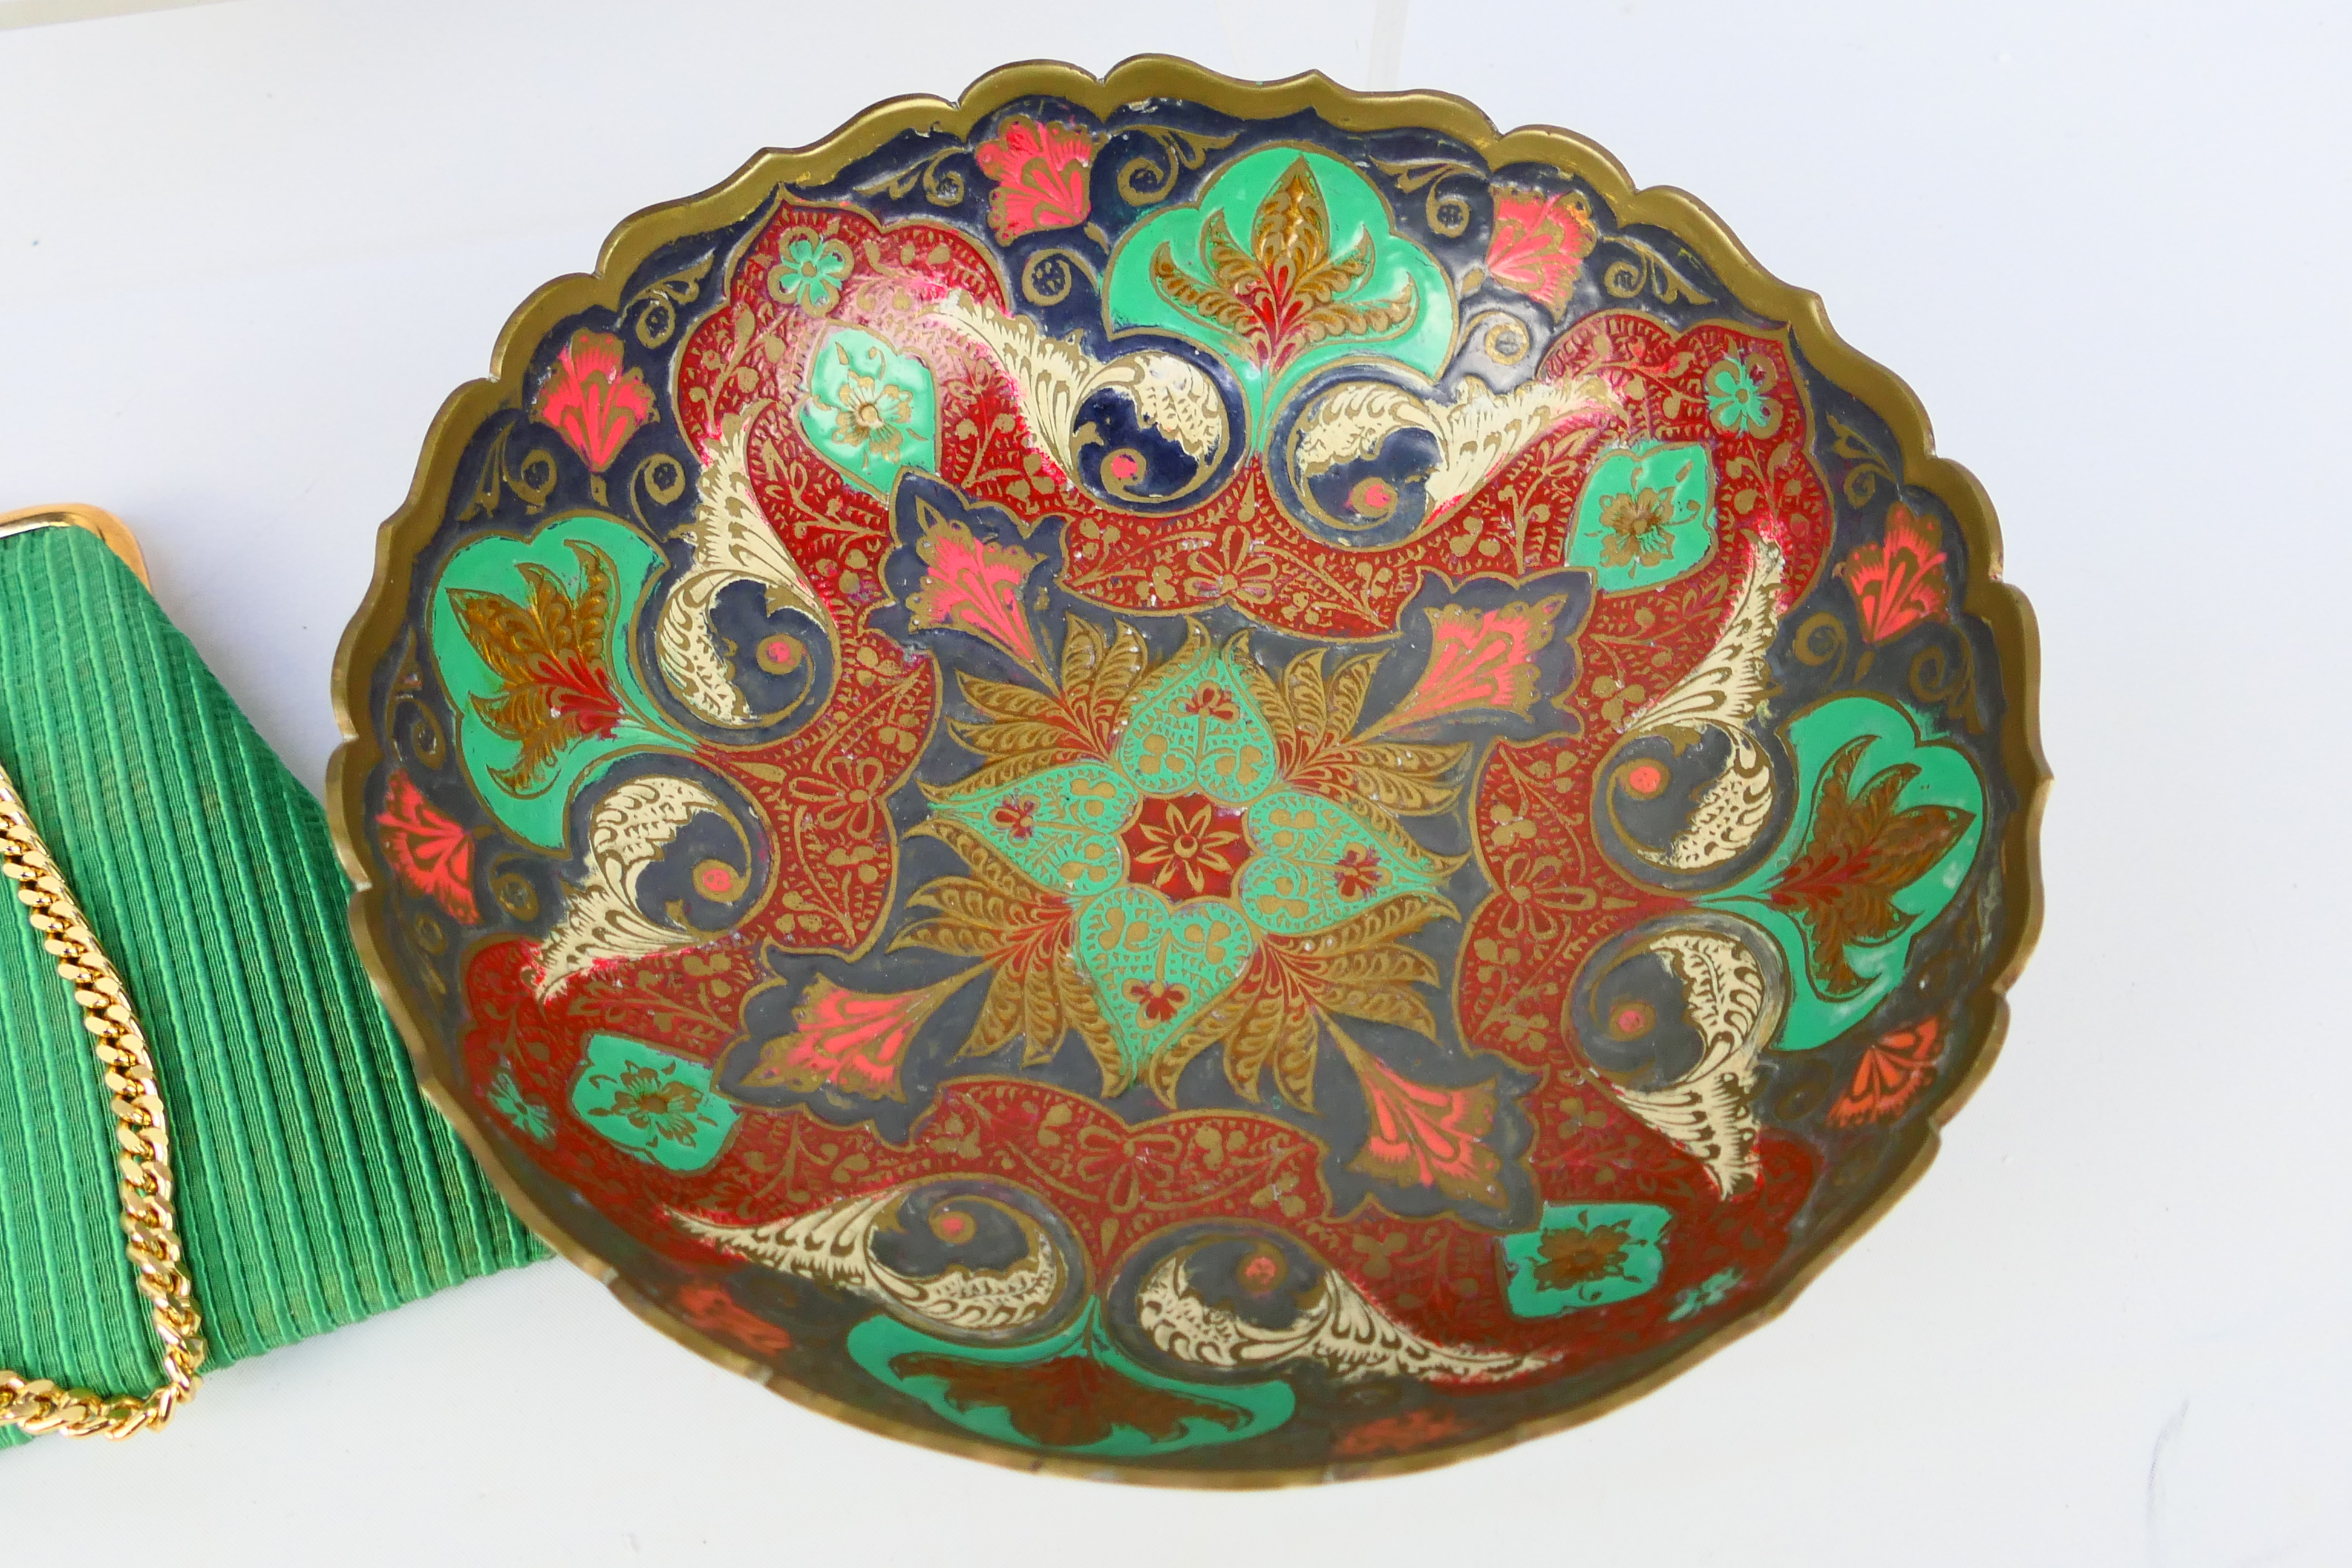 Lot to include a cloisonne ashtray, Asian metal bowl, - Image 8 of 10